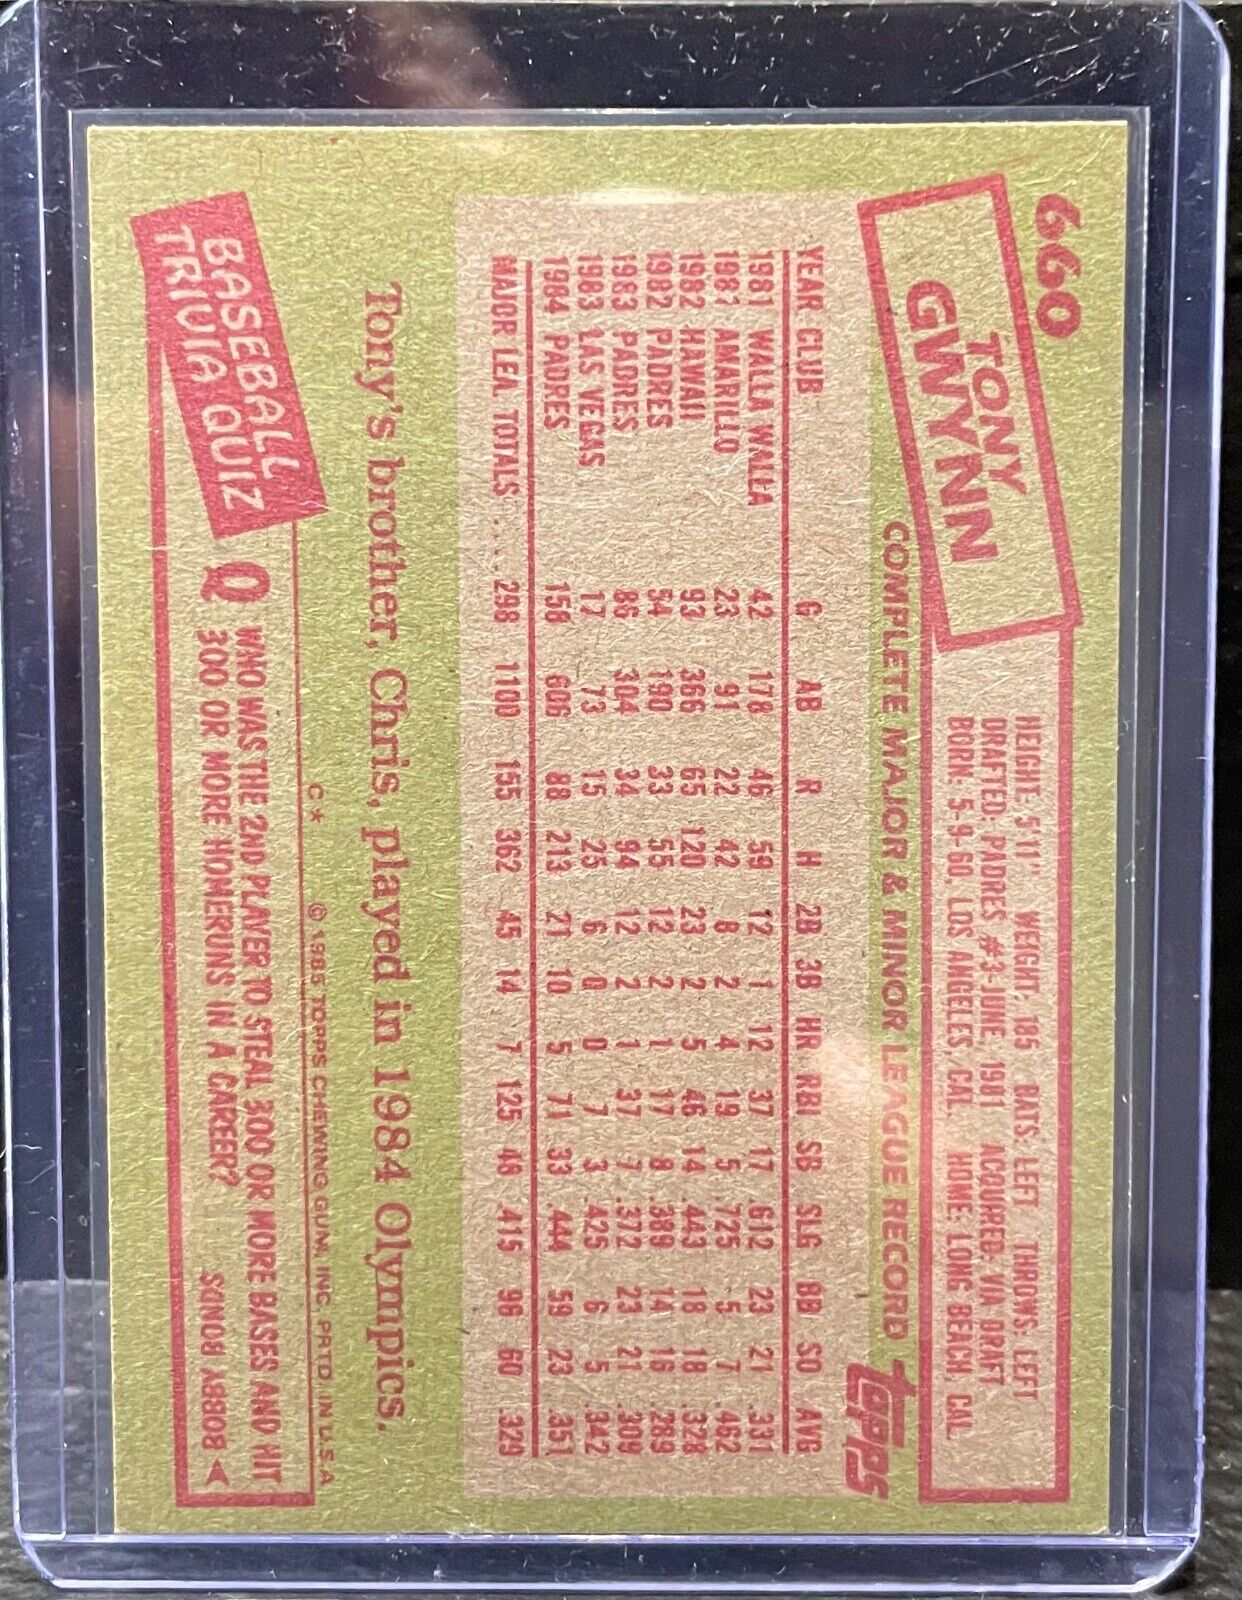 1984-85 TOPPS TONY GWYNN #660 great condition don't hesitate on this one!!🔥🔥🔥